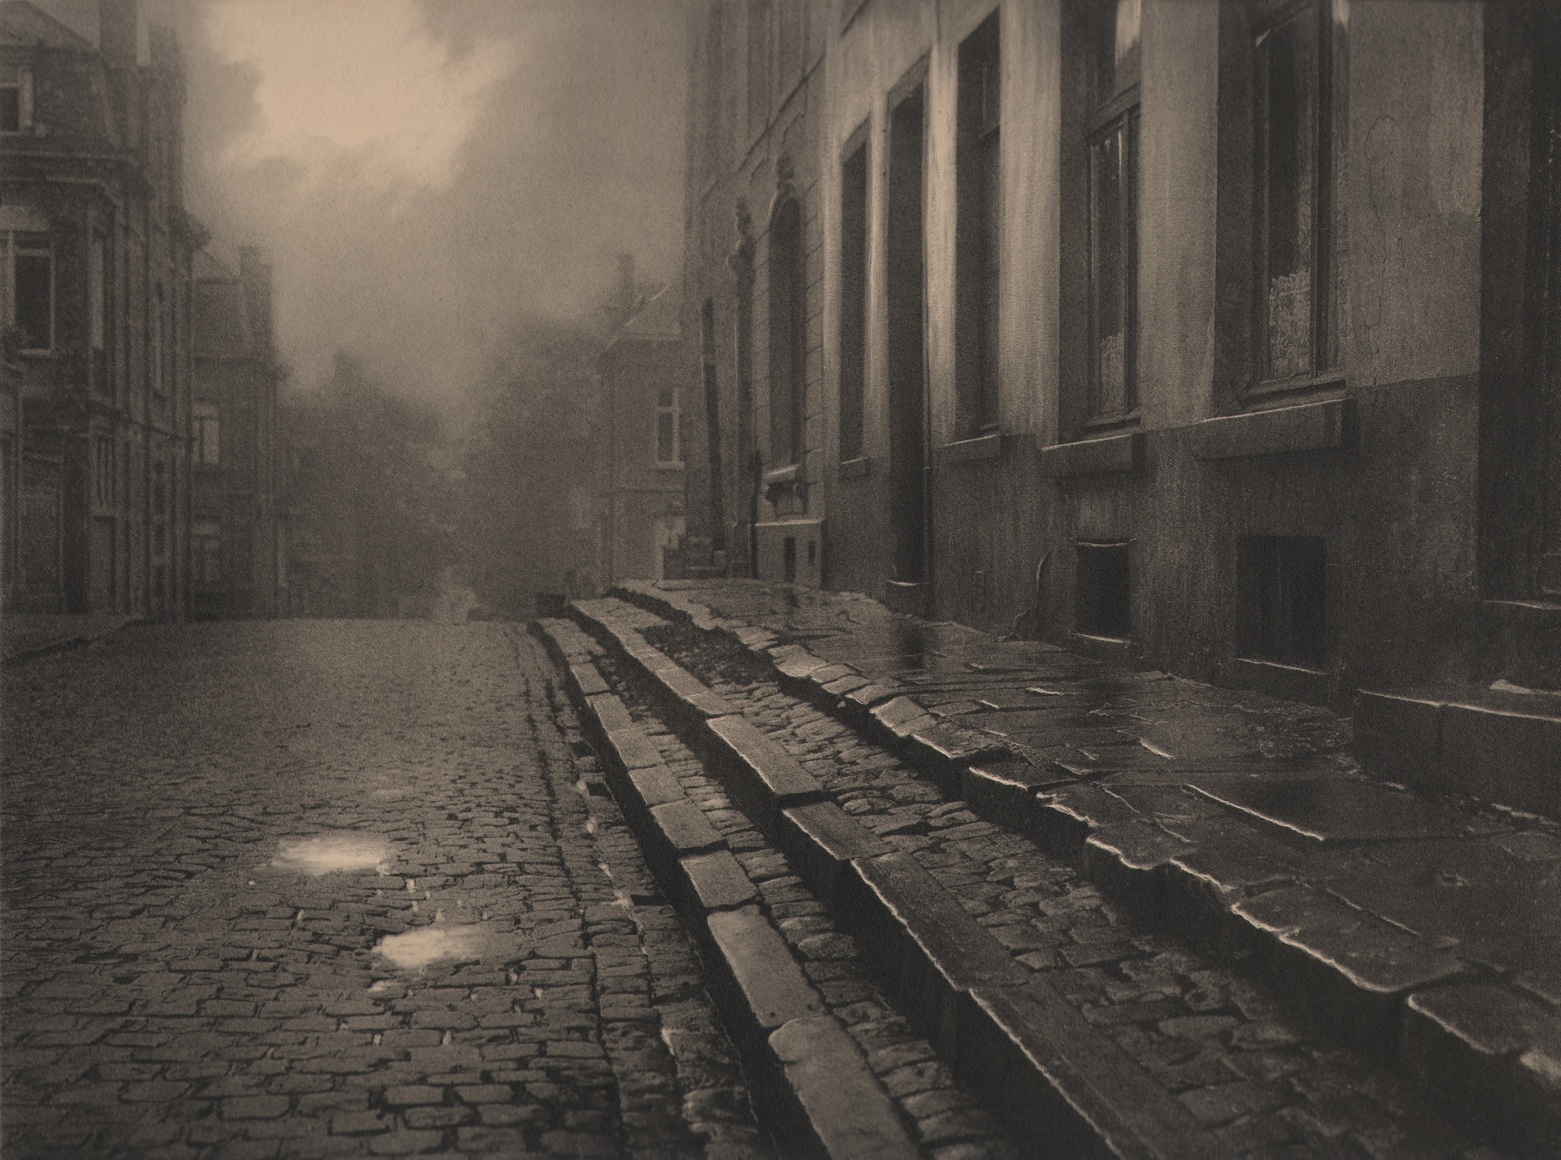 09. L&eacute;onard Misonne, [title illegible], c. 1930. Wet, cobbled, residential street and steps in soft light. Sepia-toned print.